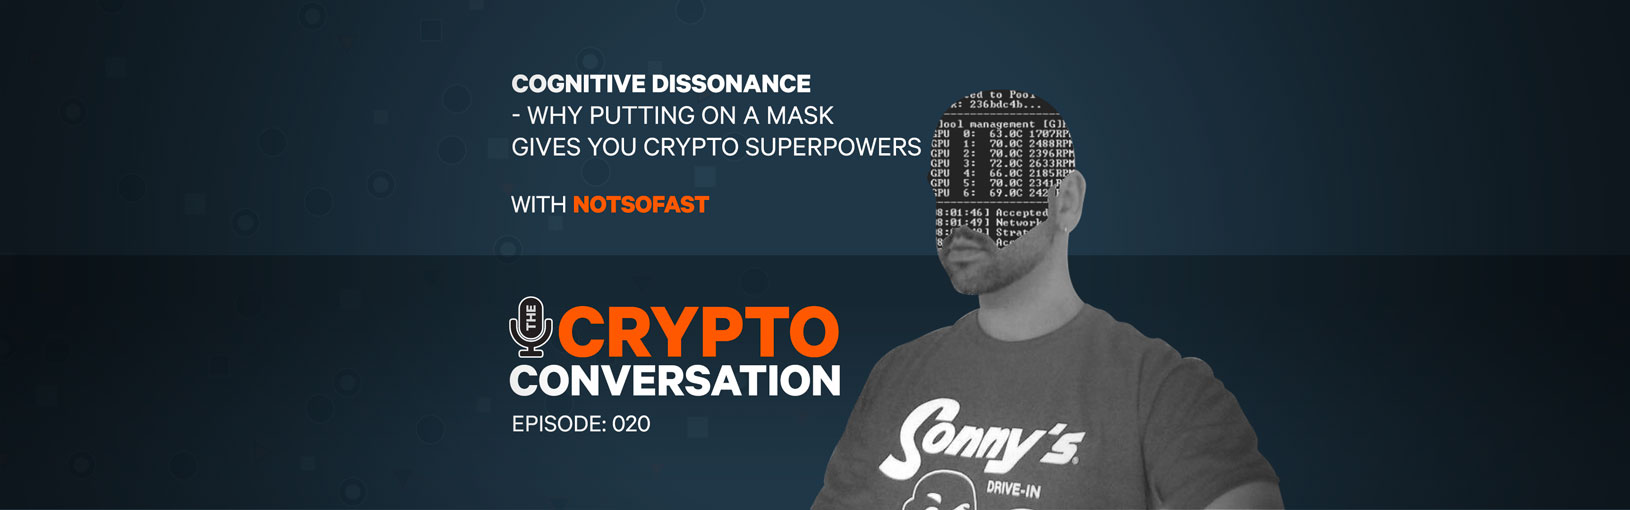 Notsofast – How putting on a mask gives you crypto superpowers